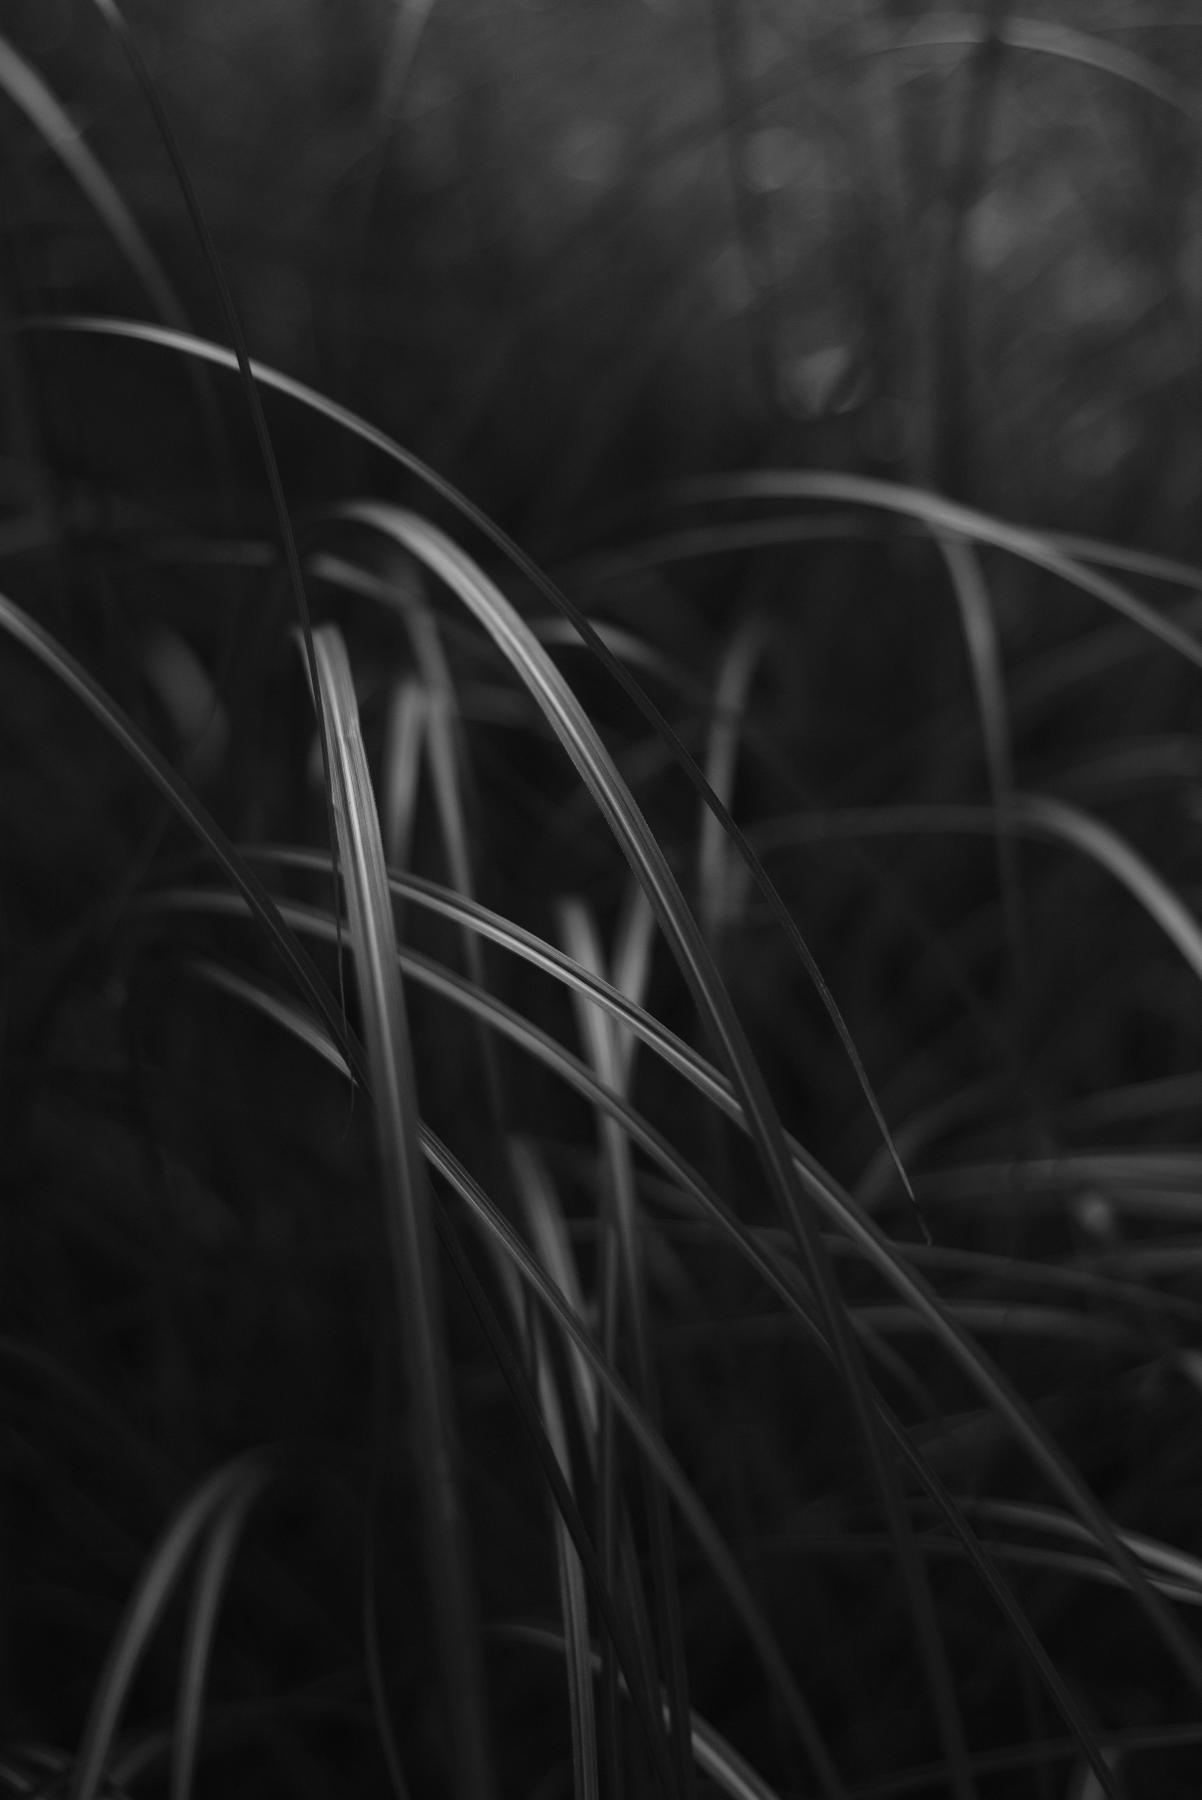 Monochrome photo of light falling on tall grasses using a narrow depth of field to highlight one area w/ background a pleasing blur.